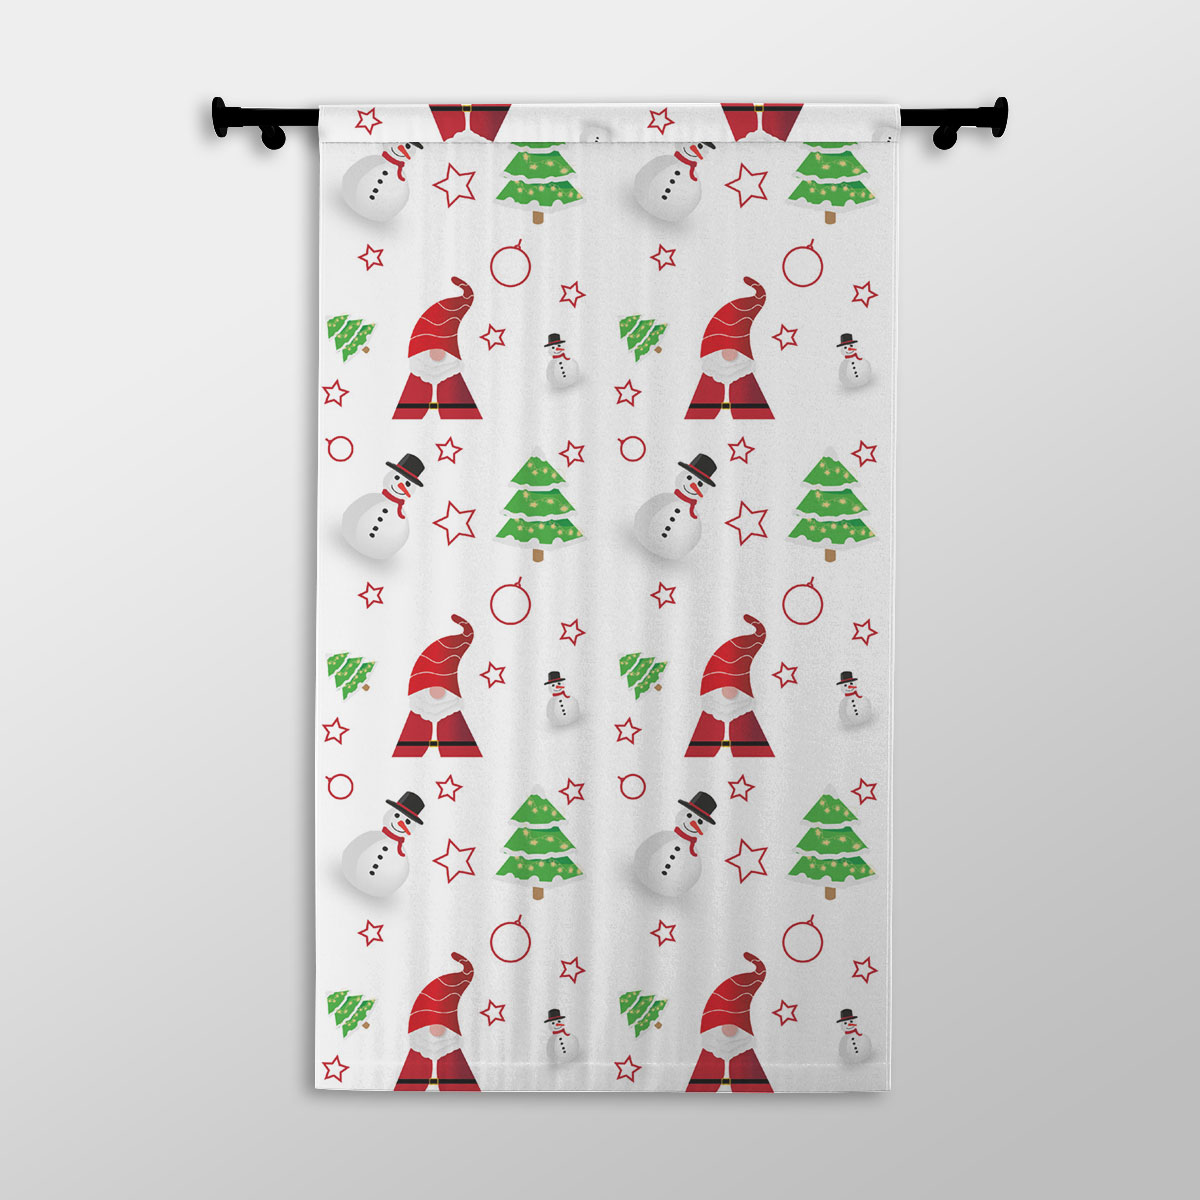 Santa Claus, Snowman Clipart And Pine Tree Silhouette Seamless Pattern Printed Window Curtains